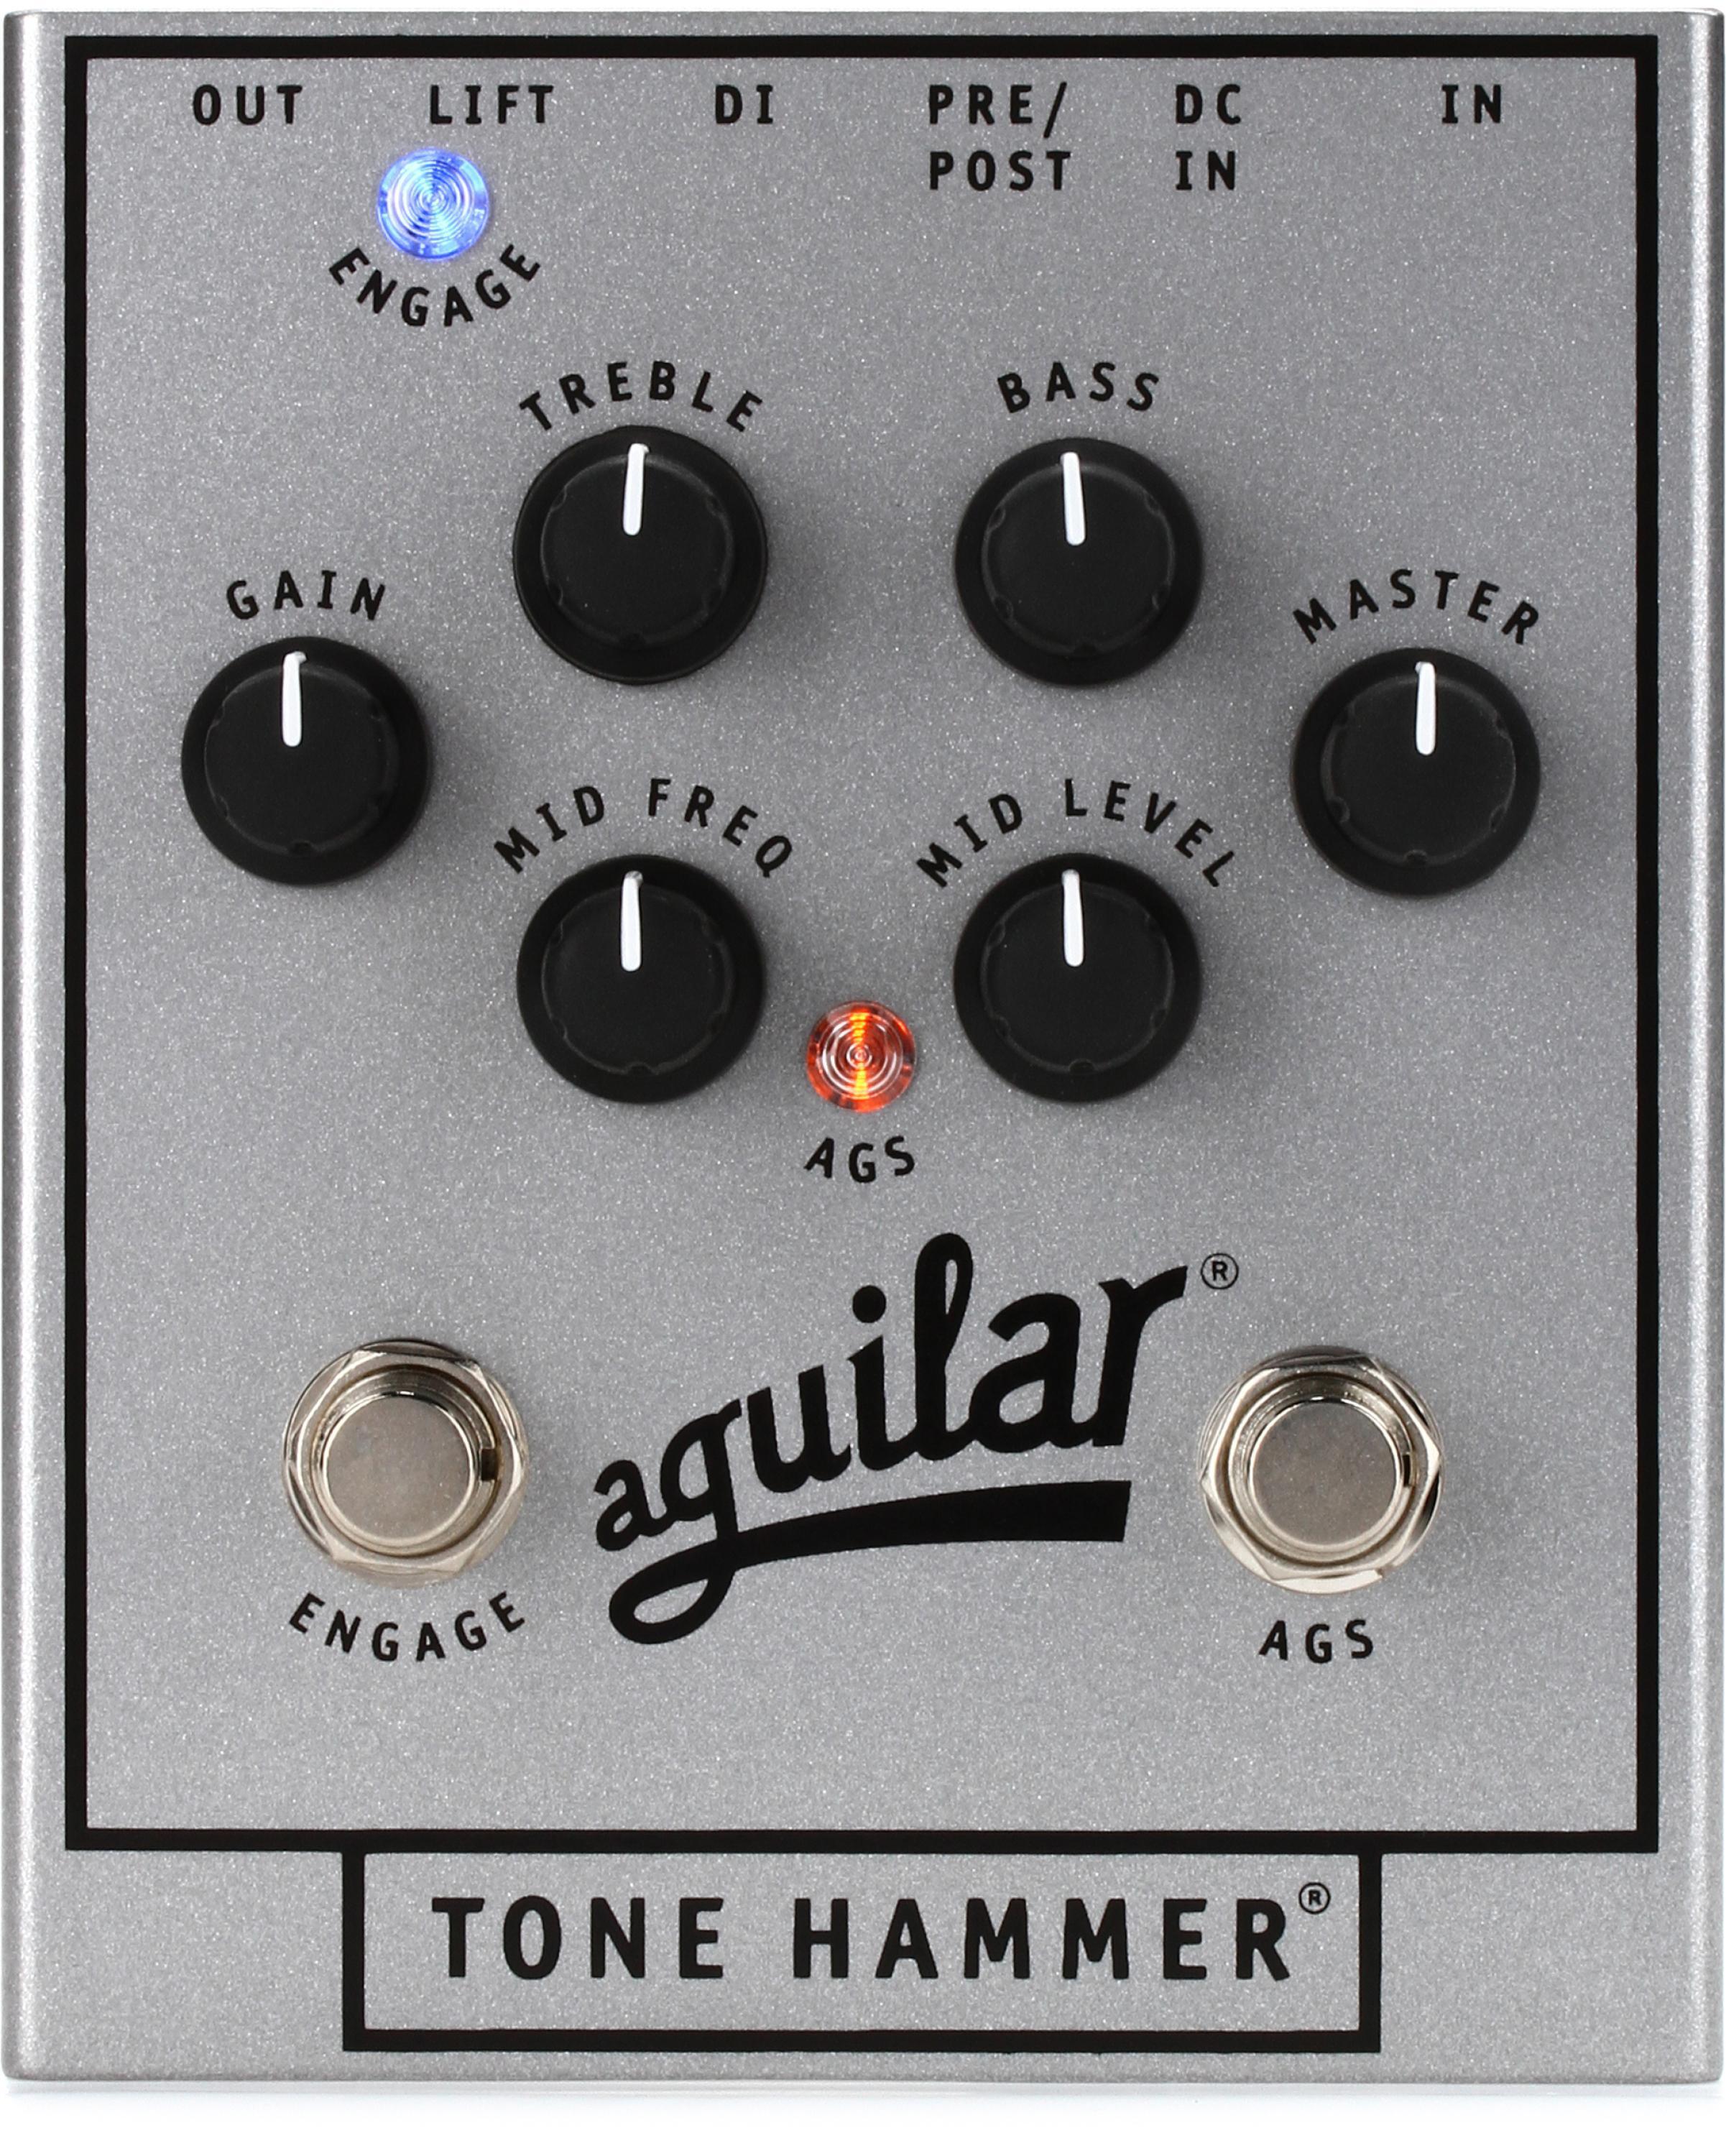 Aguilar Tone Hammer Preamp/Direct Box - 25th Anniversary Reviews 